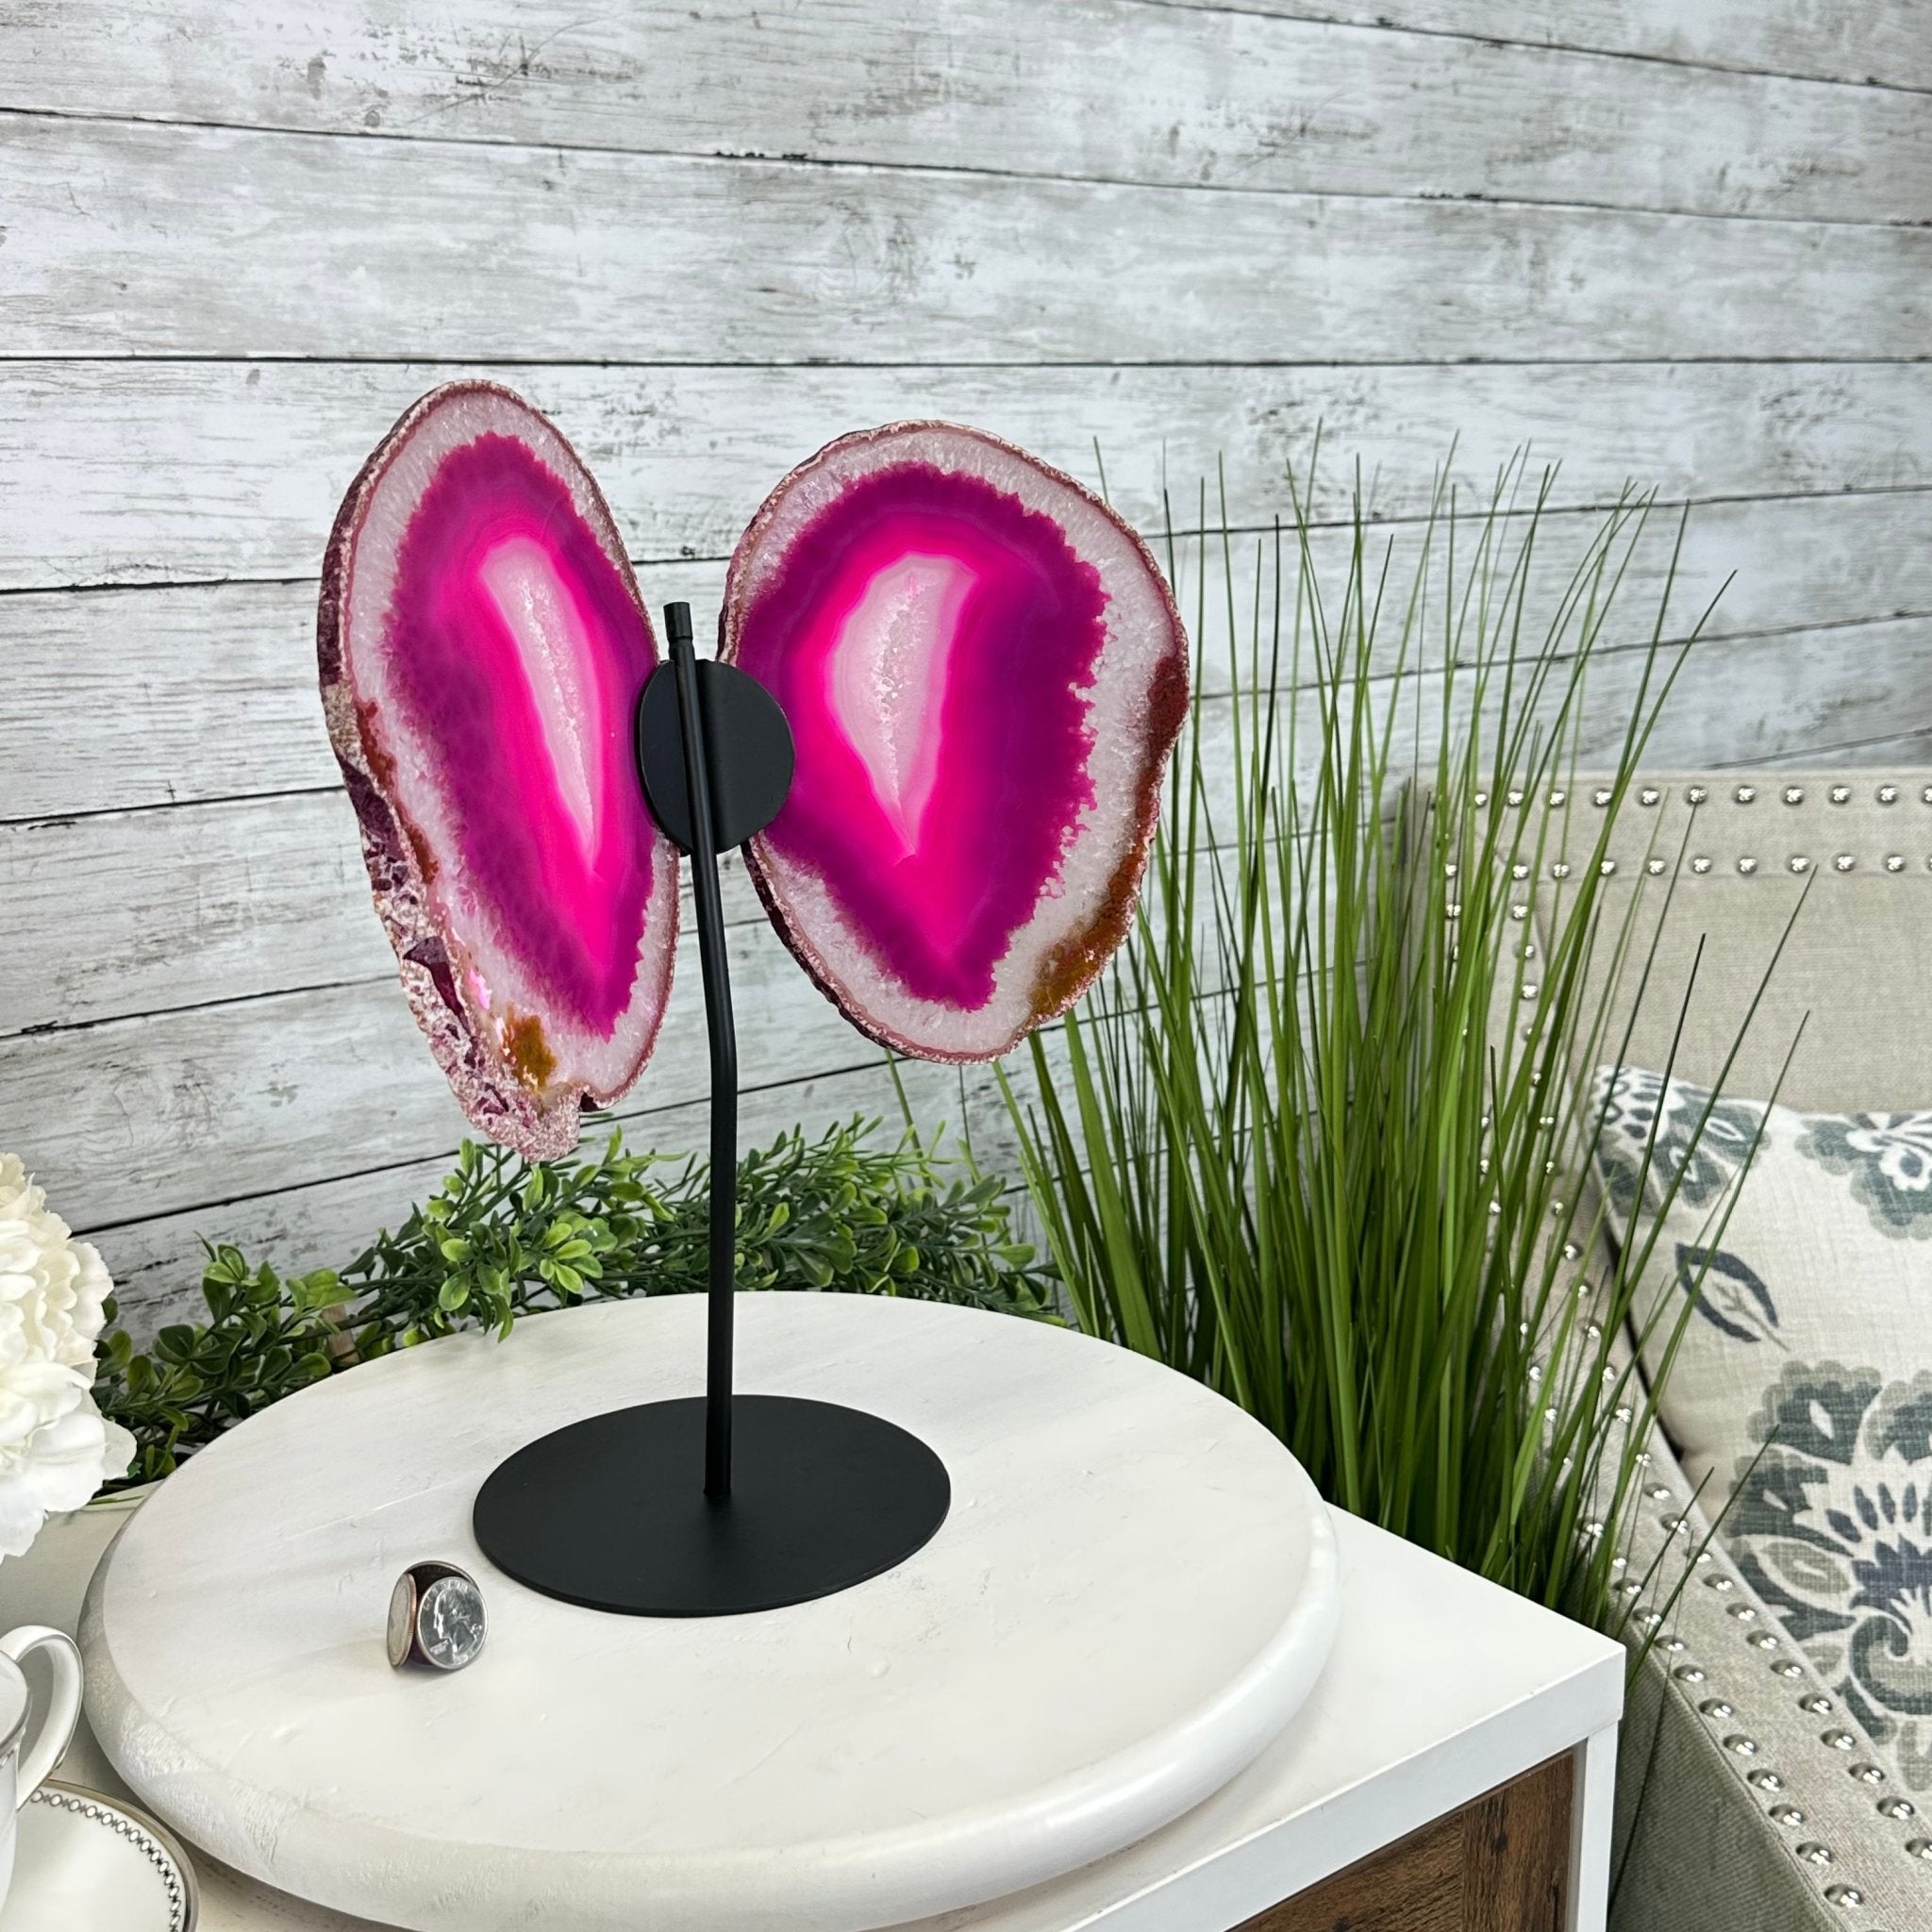 Brazilian Pink Agate "Butterfly Wings", Dyed Pink, 13.5" Tall #5050PA-068 by Brazil Gems - Brazil GemsBrazil GemsBrazilian Pink Agate "Butterfly Wings", Dyed Pink, 13.5" Tall #5050PA-068 by Brazil GemsAgate Butterfly Wings5050PA-068